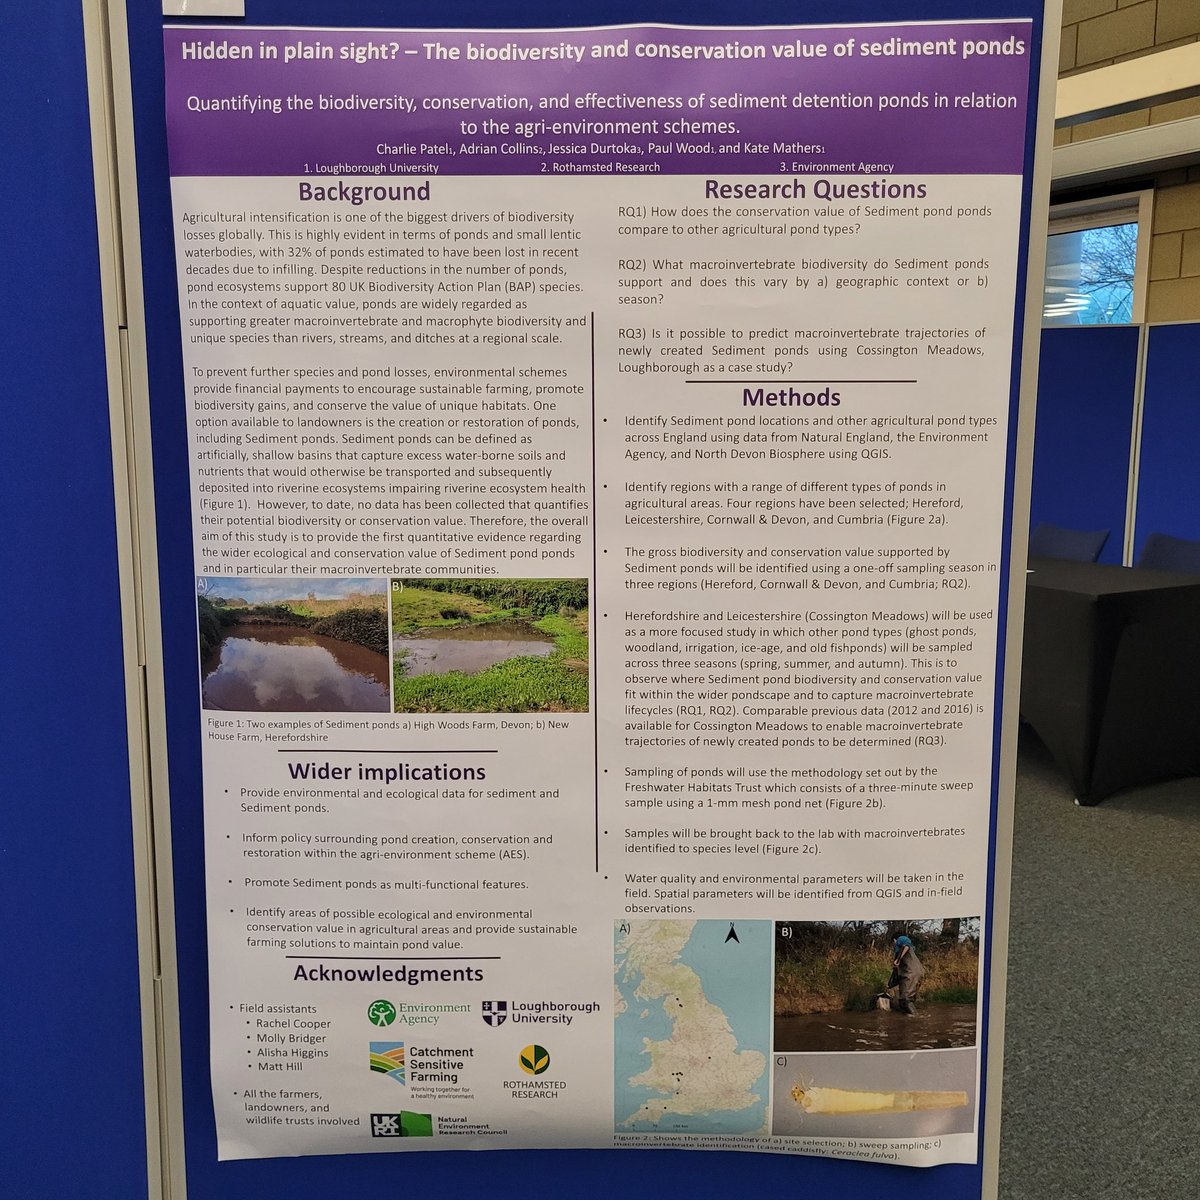 Representing @lborogeog at #LboroResConf23 come and talk to me about my research on sediment ponds & biodiversity located at number 48! #ecology #biodiversity #ponds #agriculture